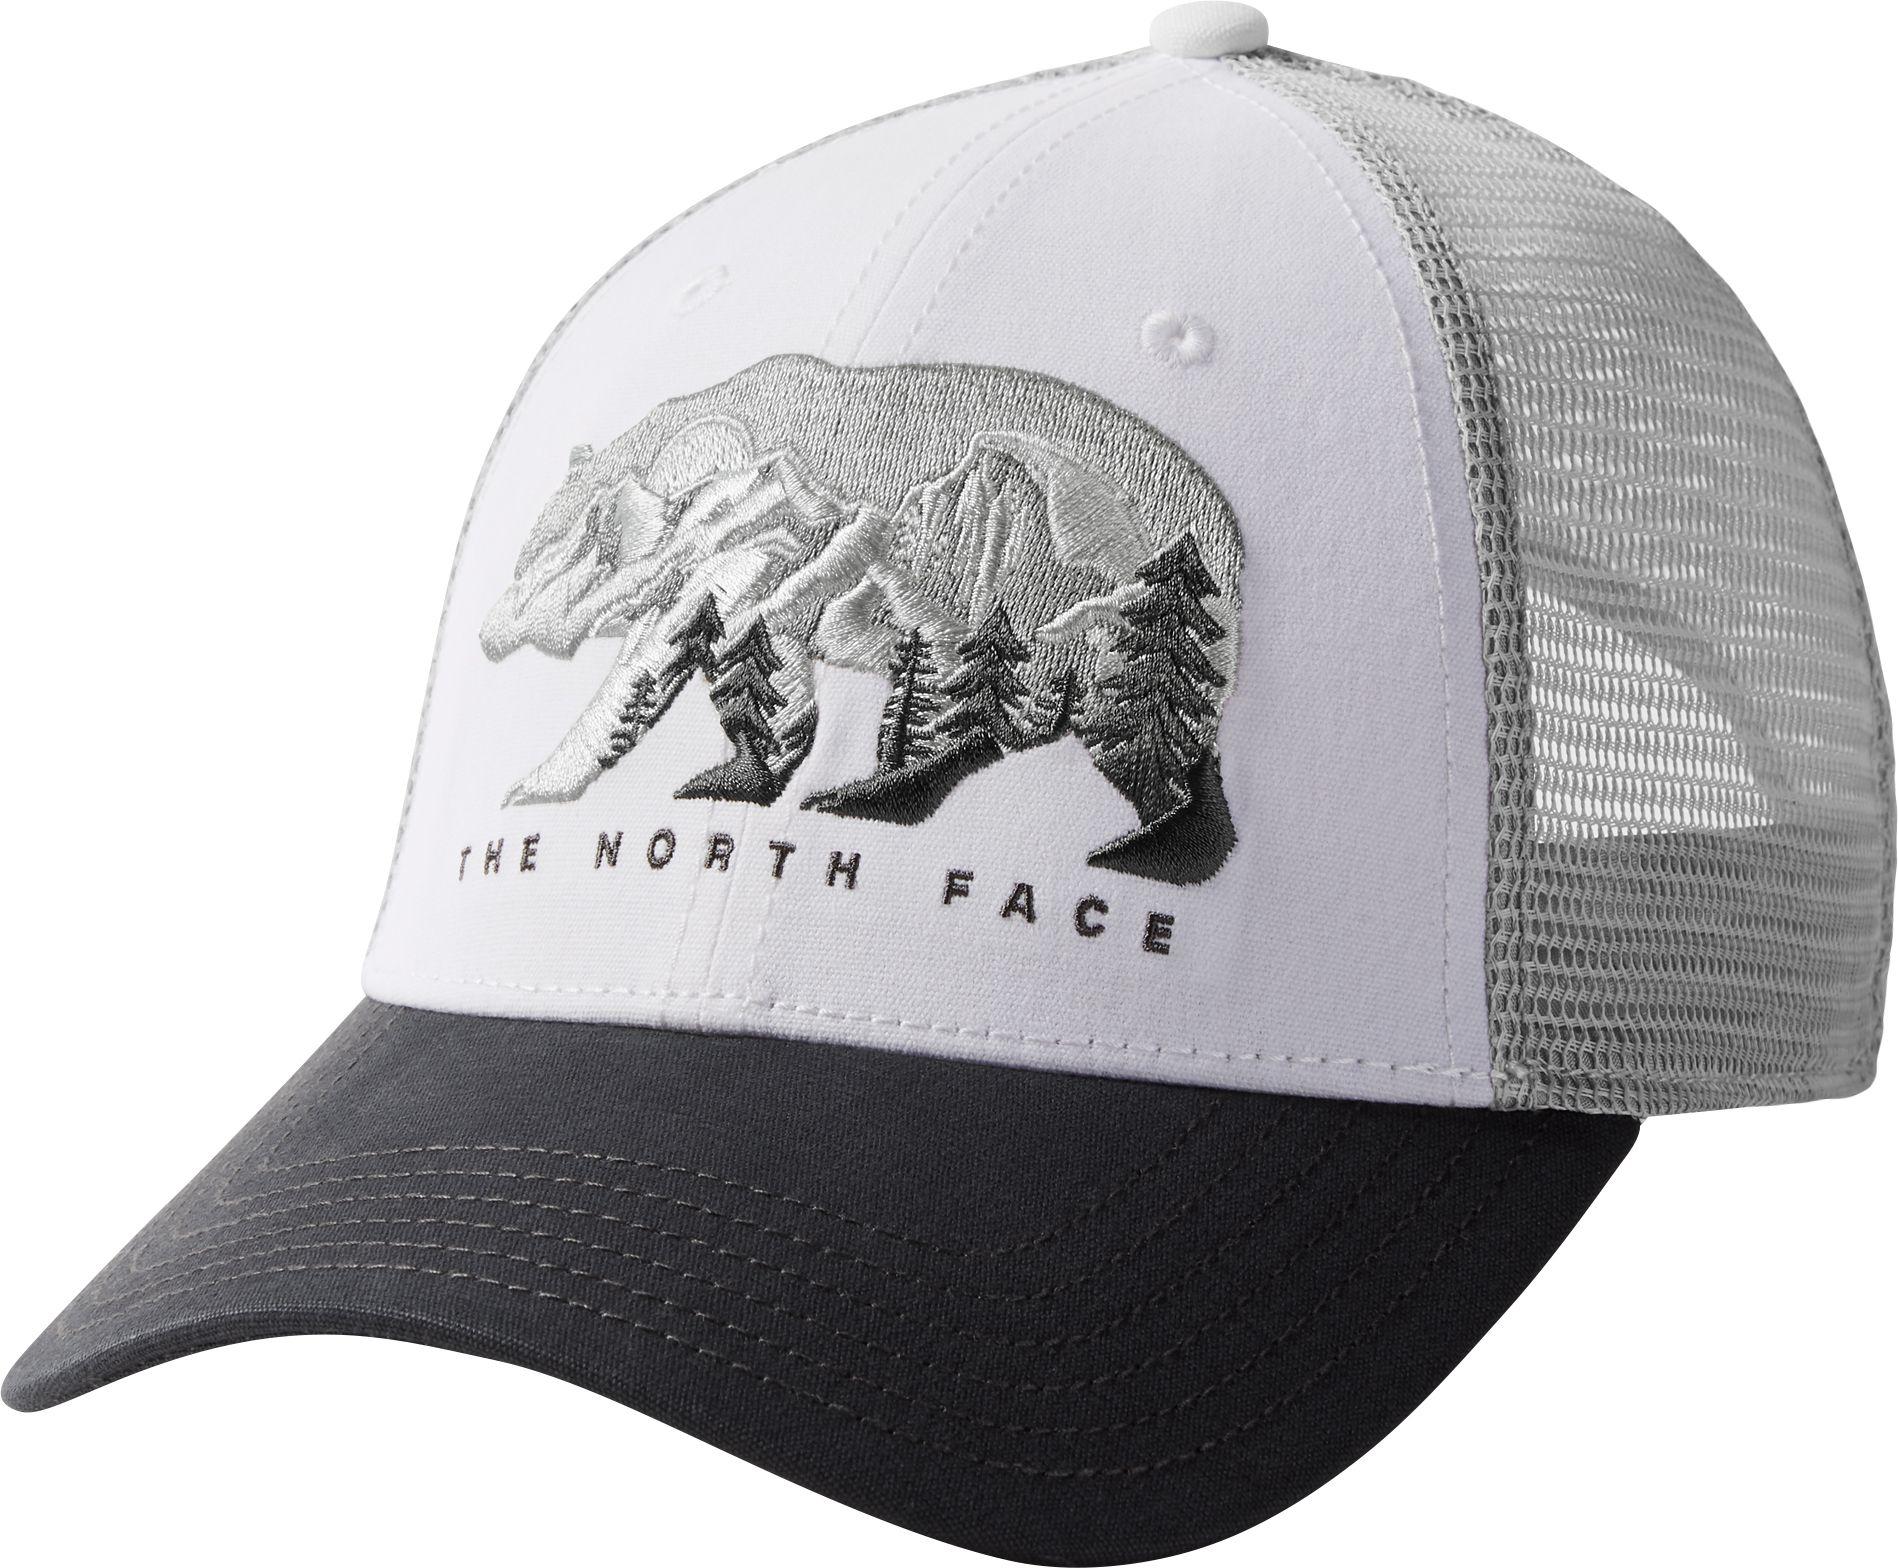 The North Face North Face Emb Trucker Hat for Men - Lyst